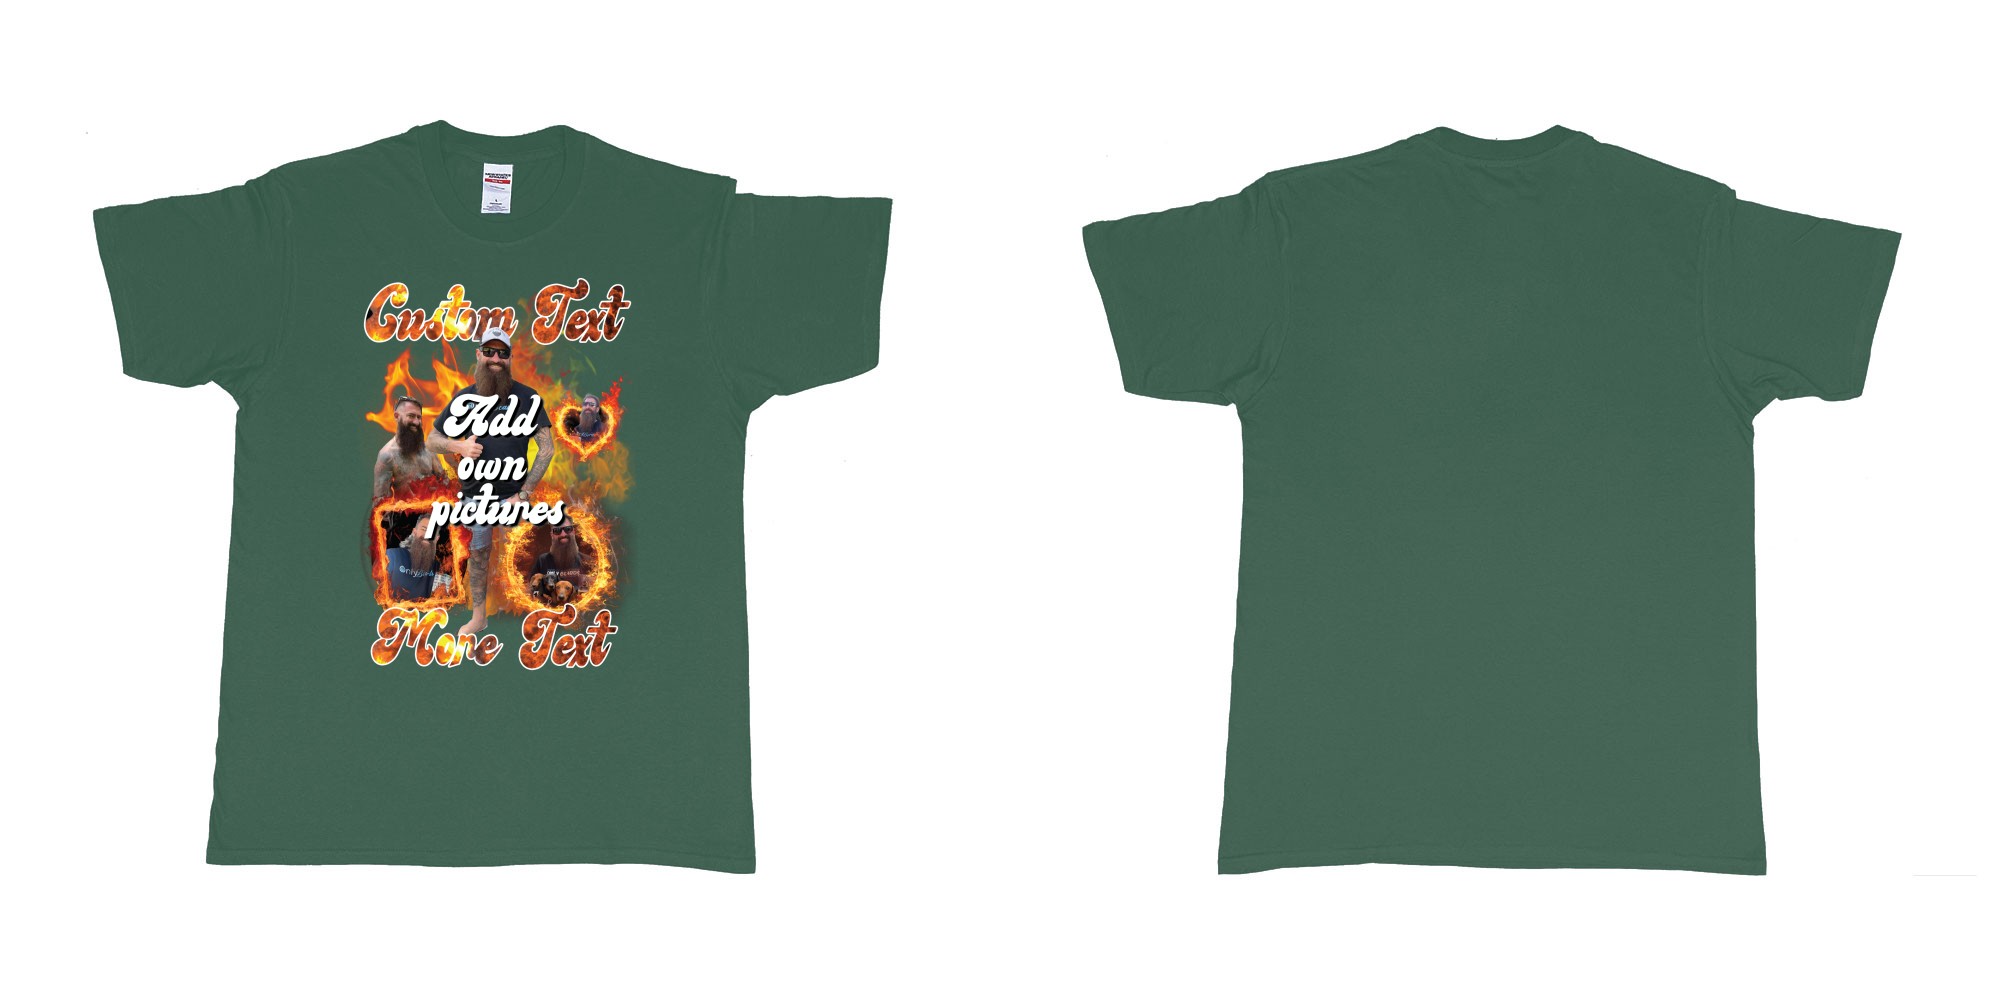 Custom tshirt design fire frames own custom pictures and text in fabric color forest-green choice your own text made in Bali by The Pirate Way